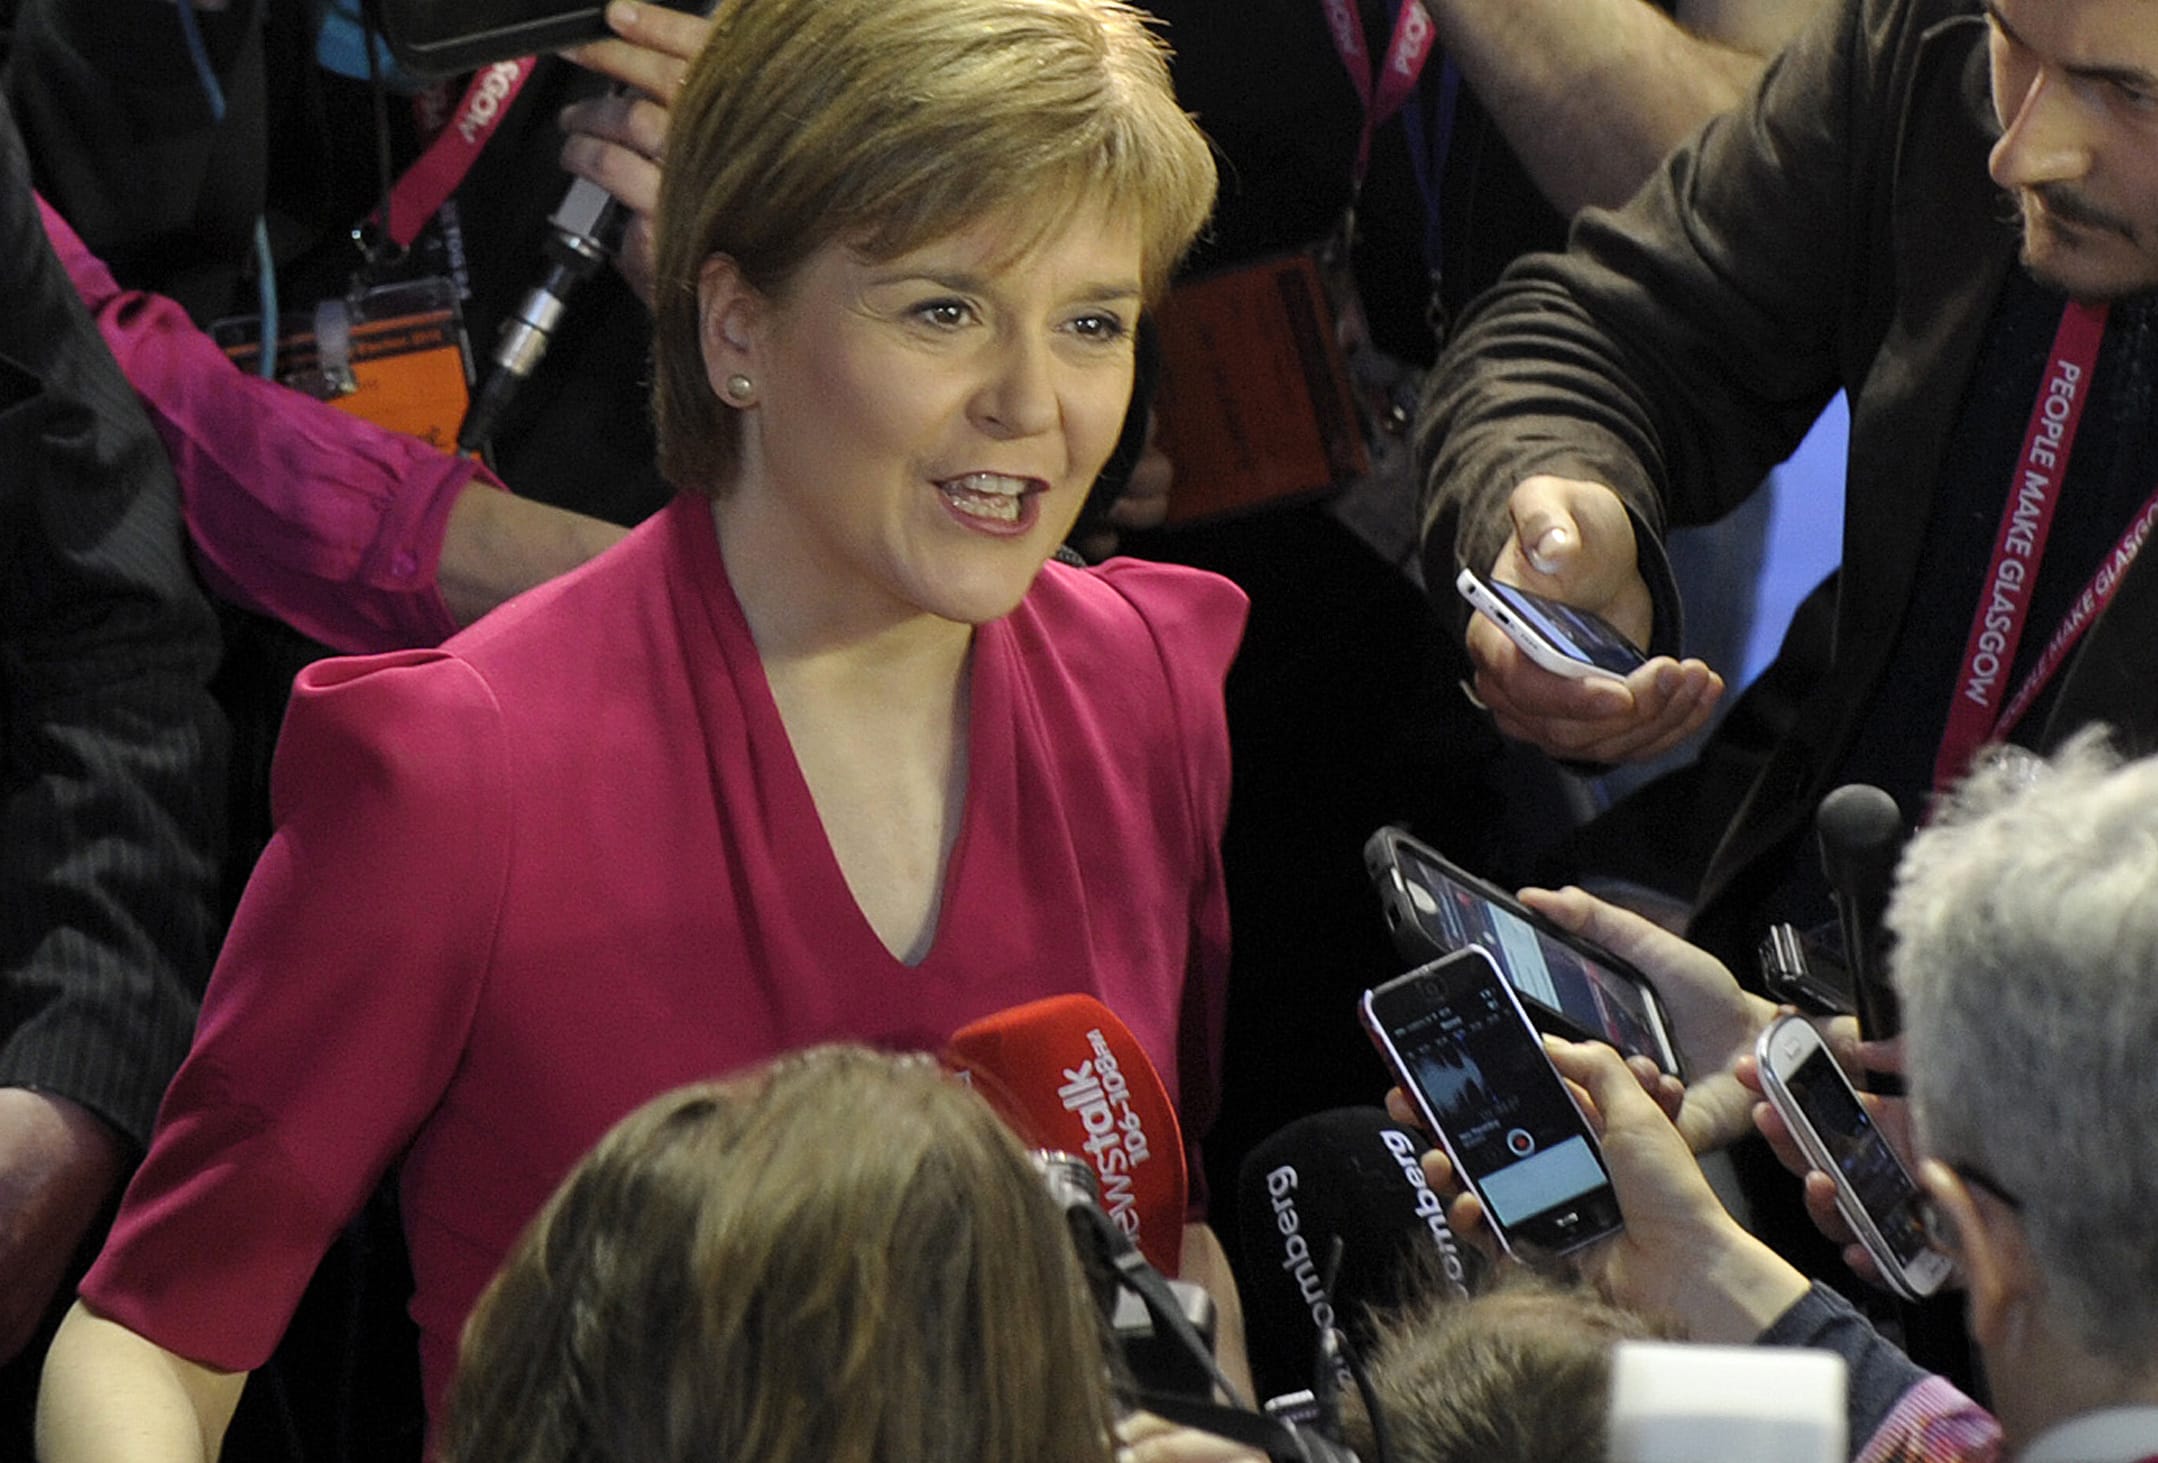 Scottish National Party (SNP) leader Nicola Sturgeon speaks to the media after the election results in Glasglow.